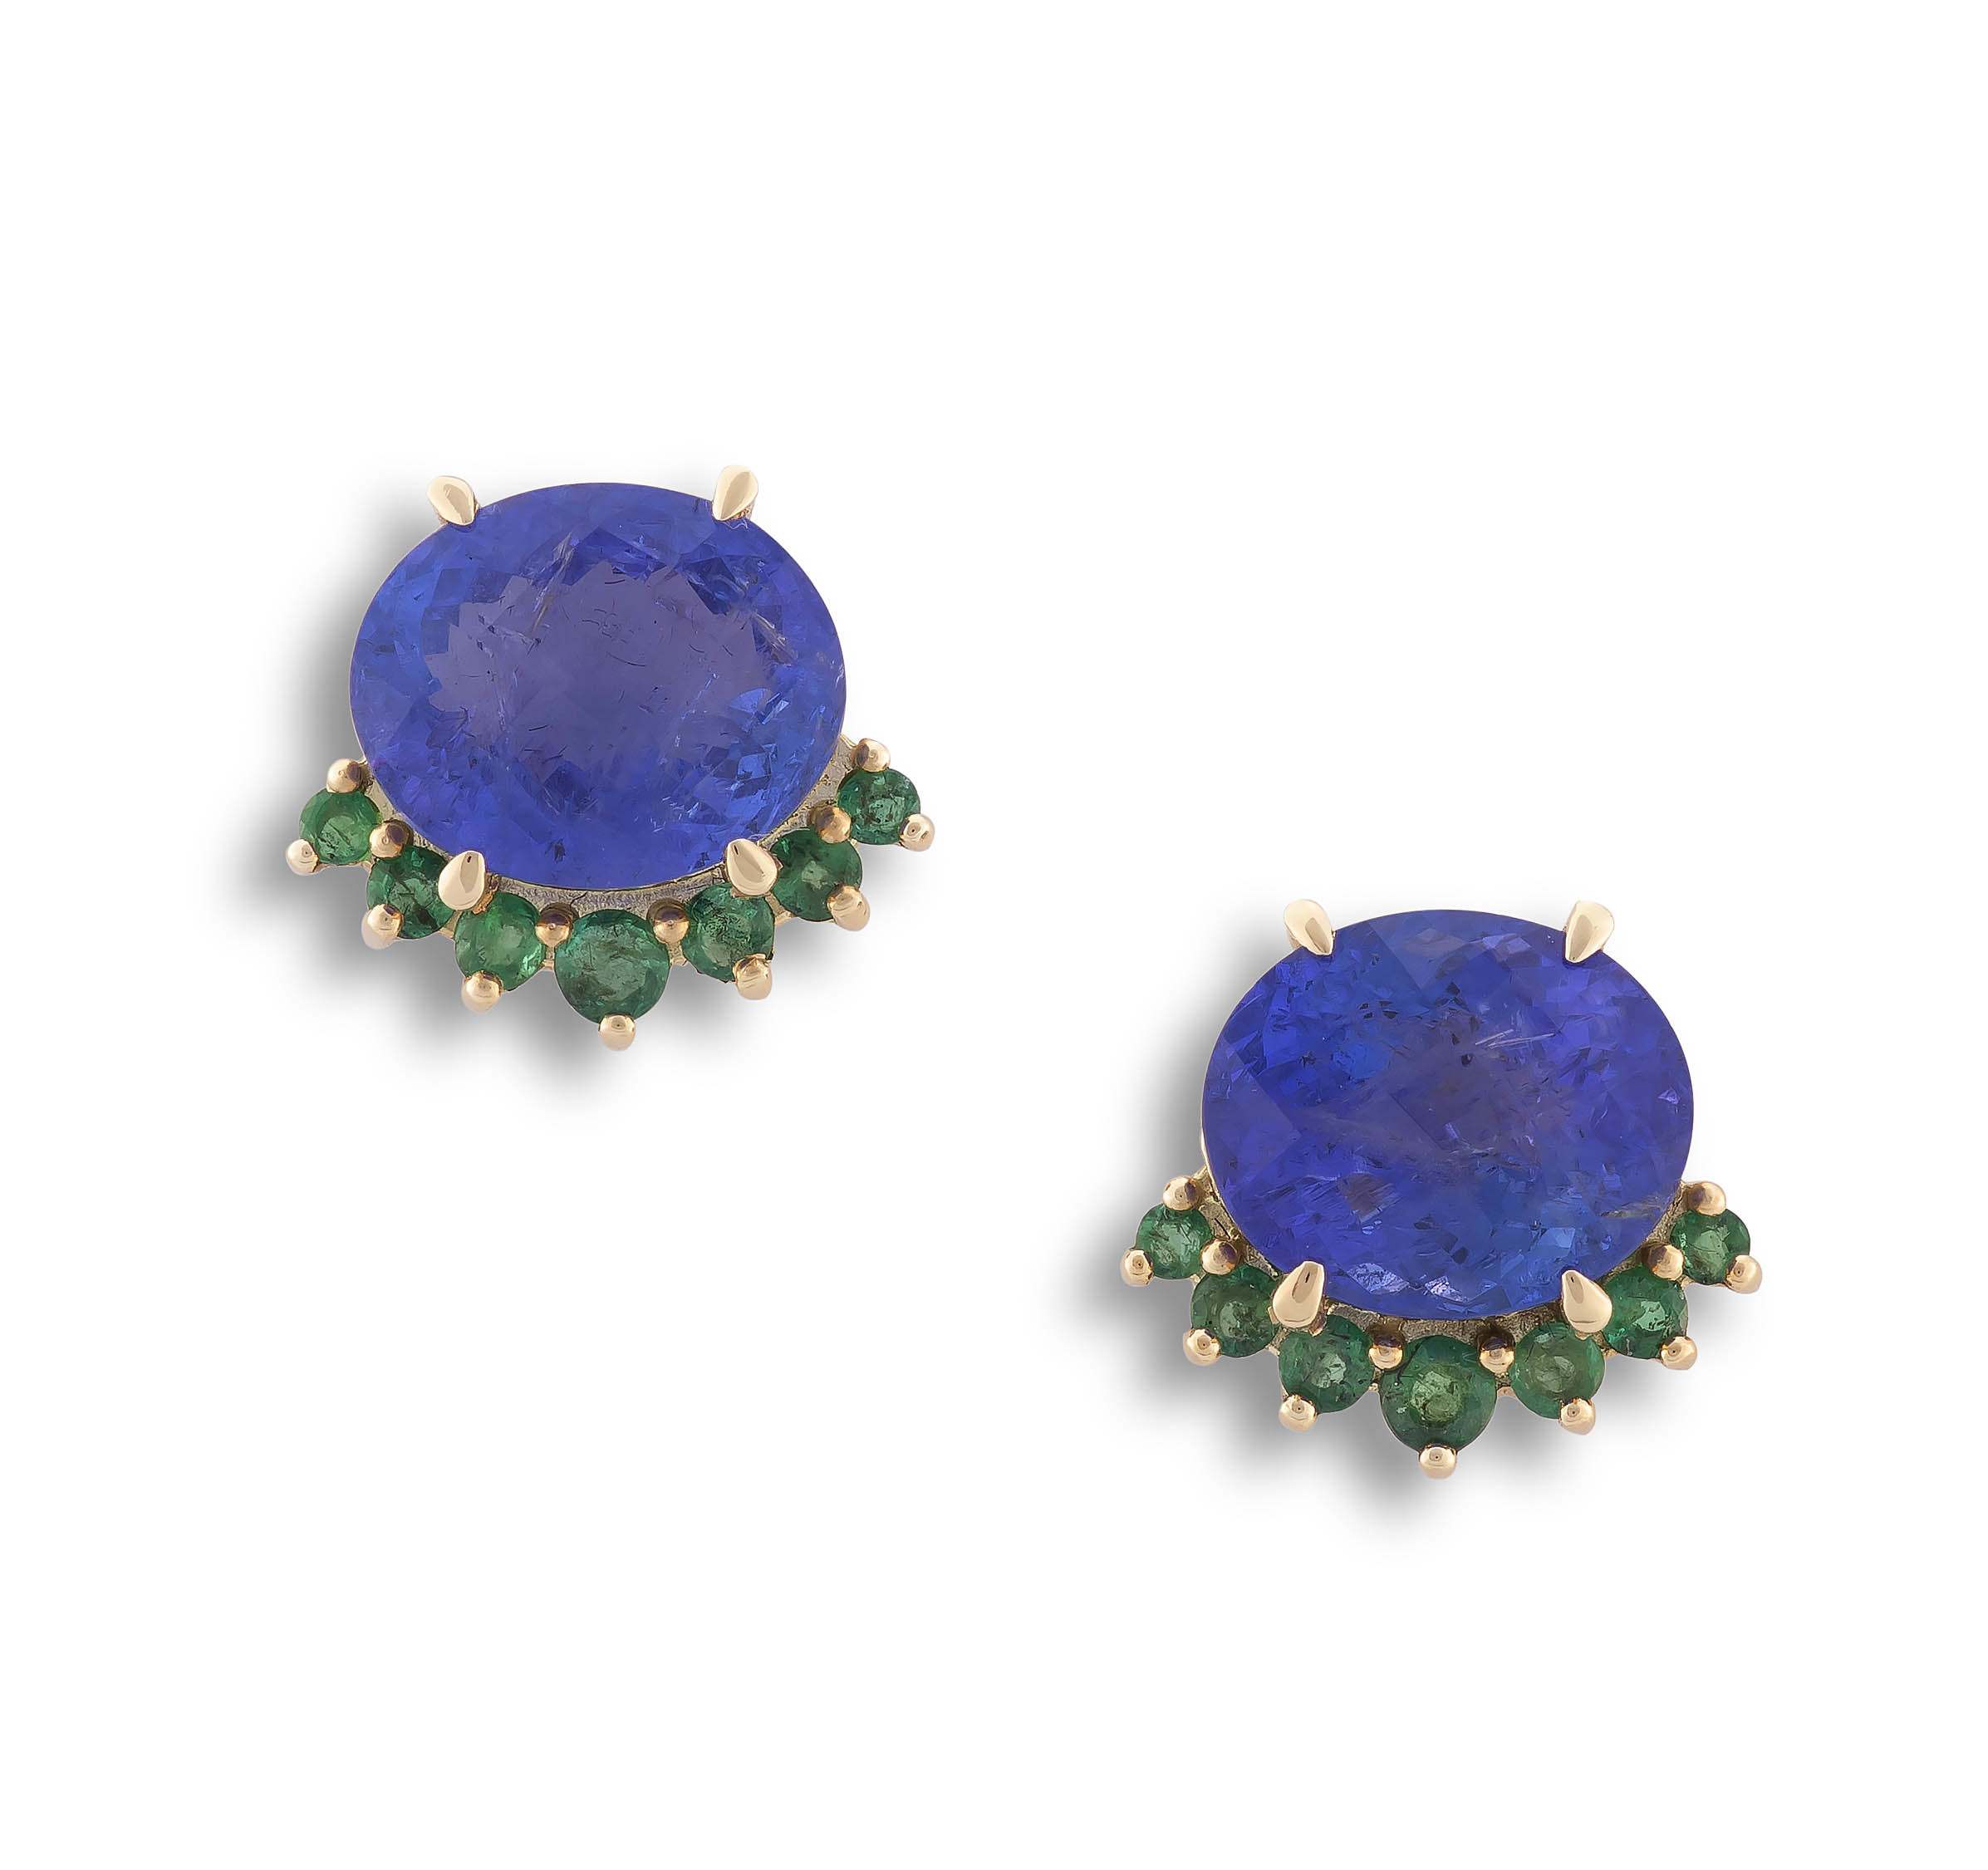 Pair of tanzanite and emerald earrings, designed by Taz Watson